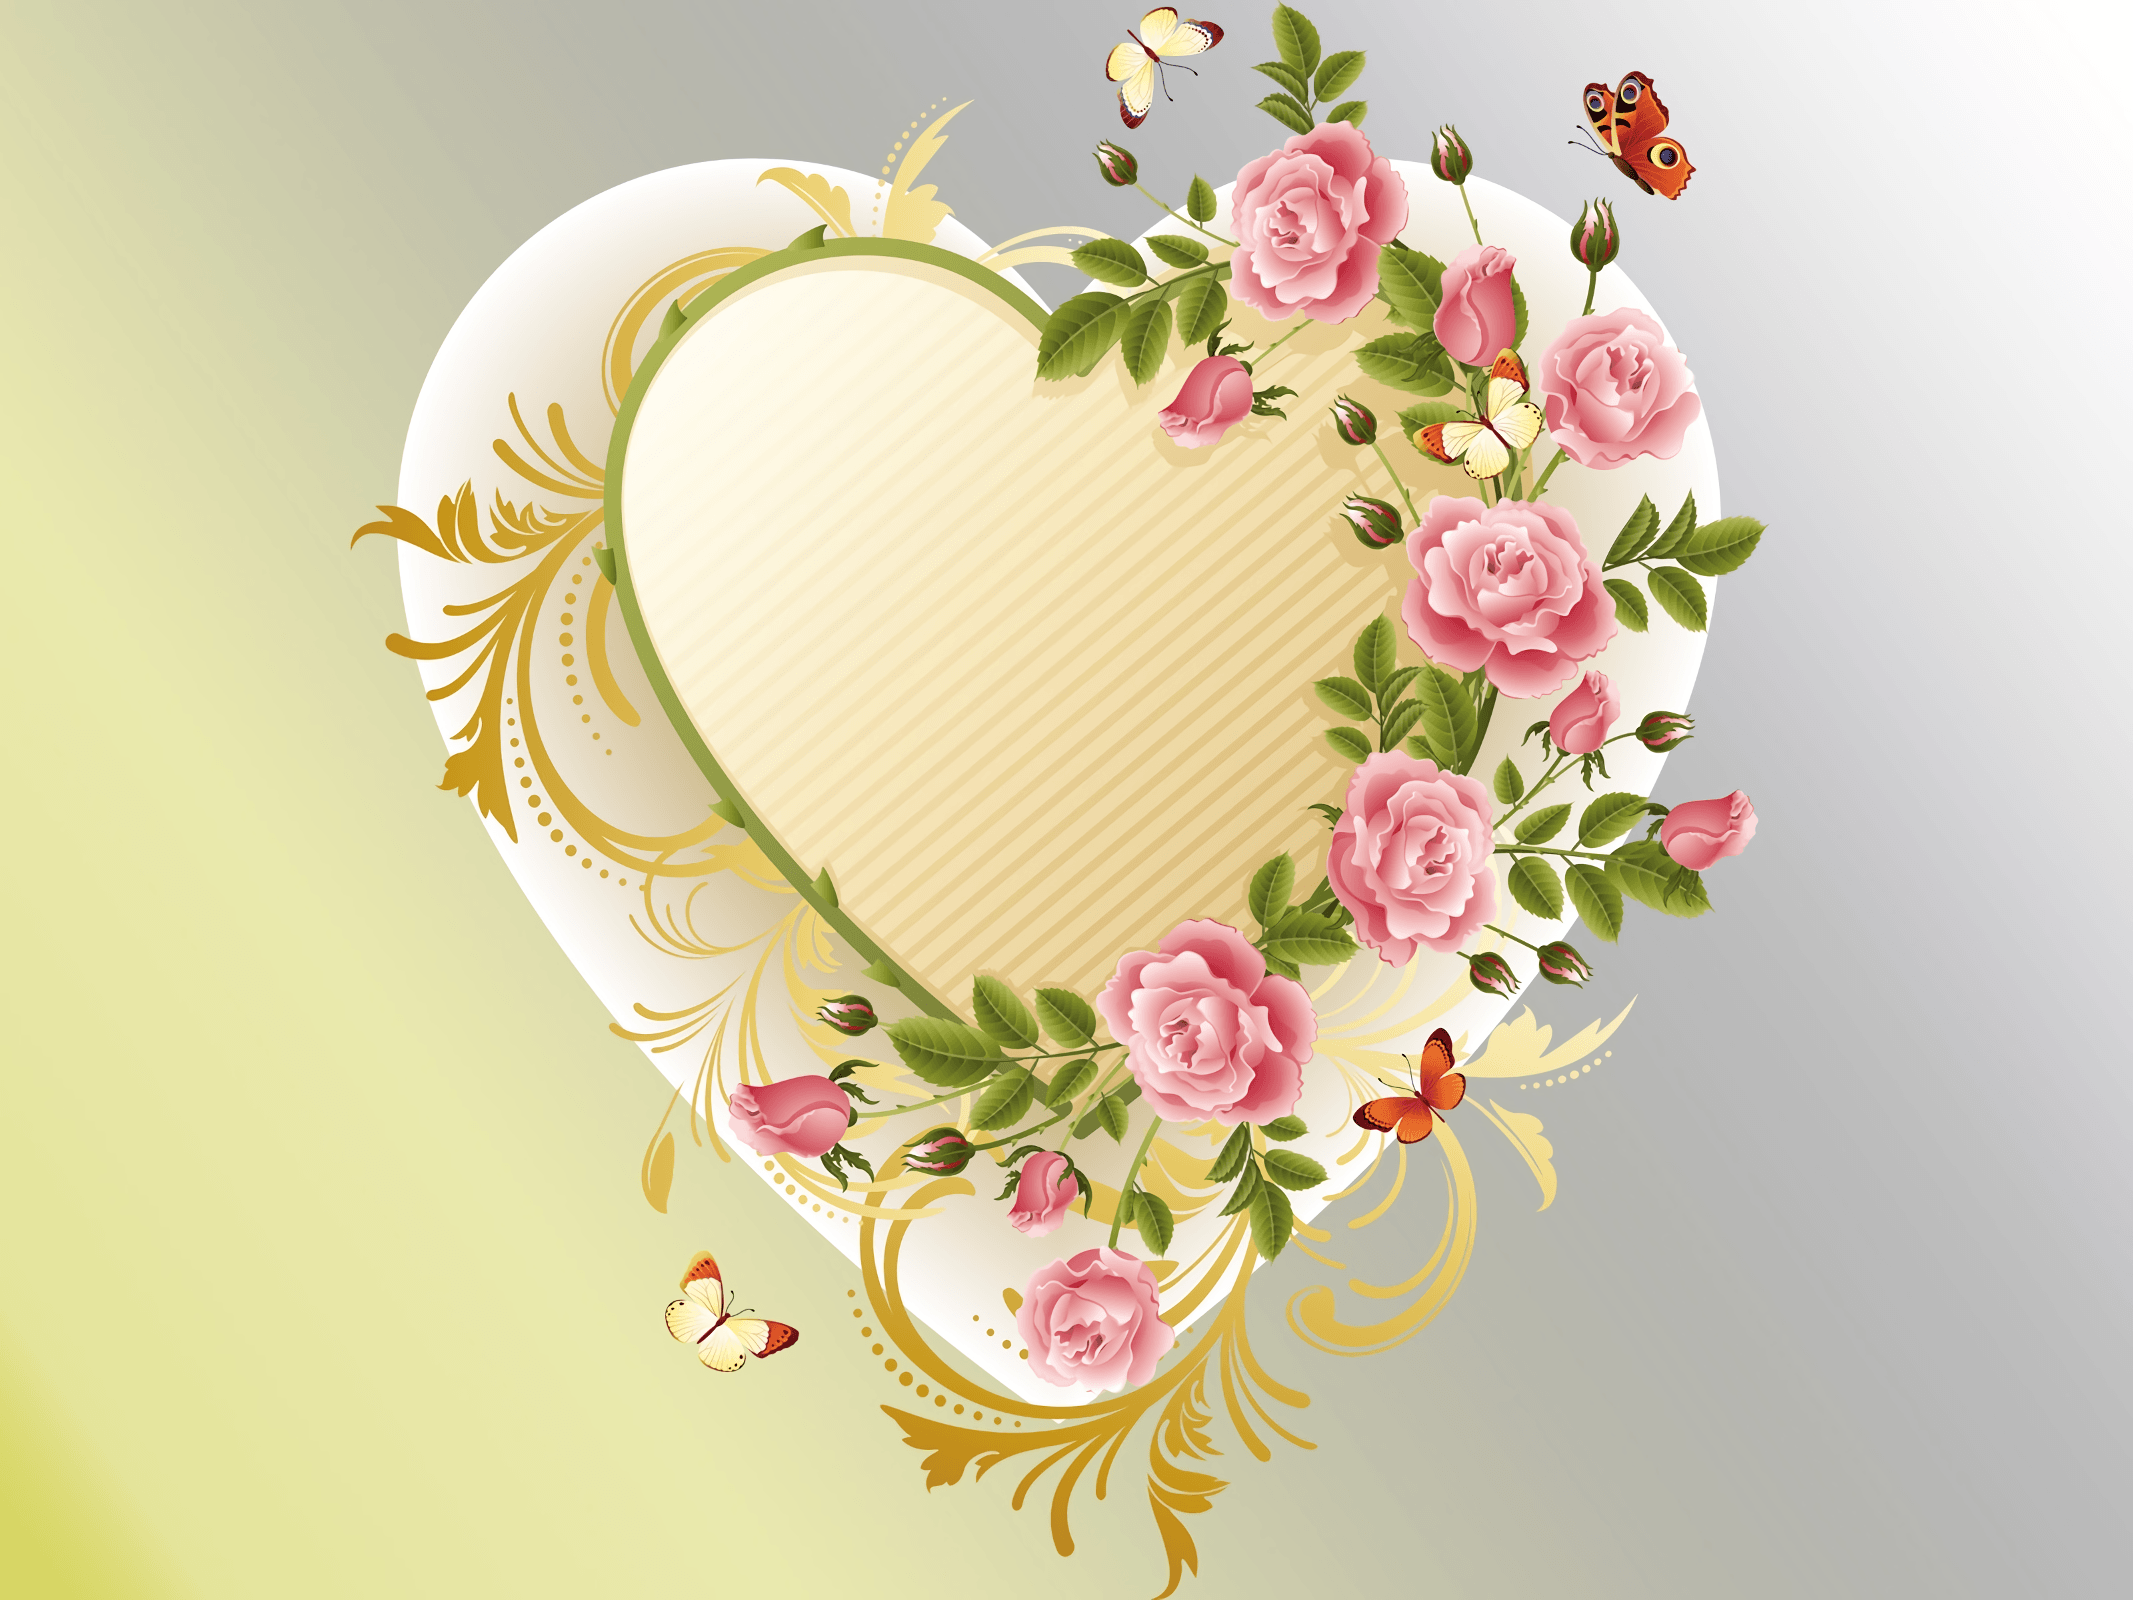 Hearts And Flowers Wallpapers Top Free Hearts And Flowers Backgrounds Wallpaperaccess